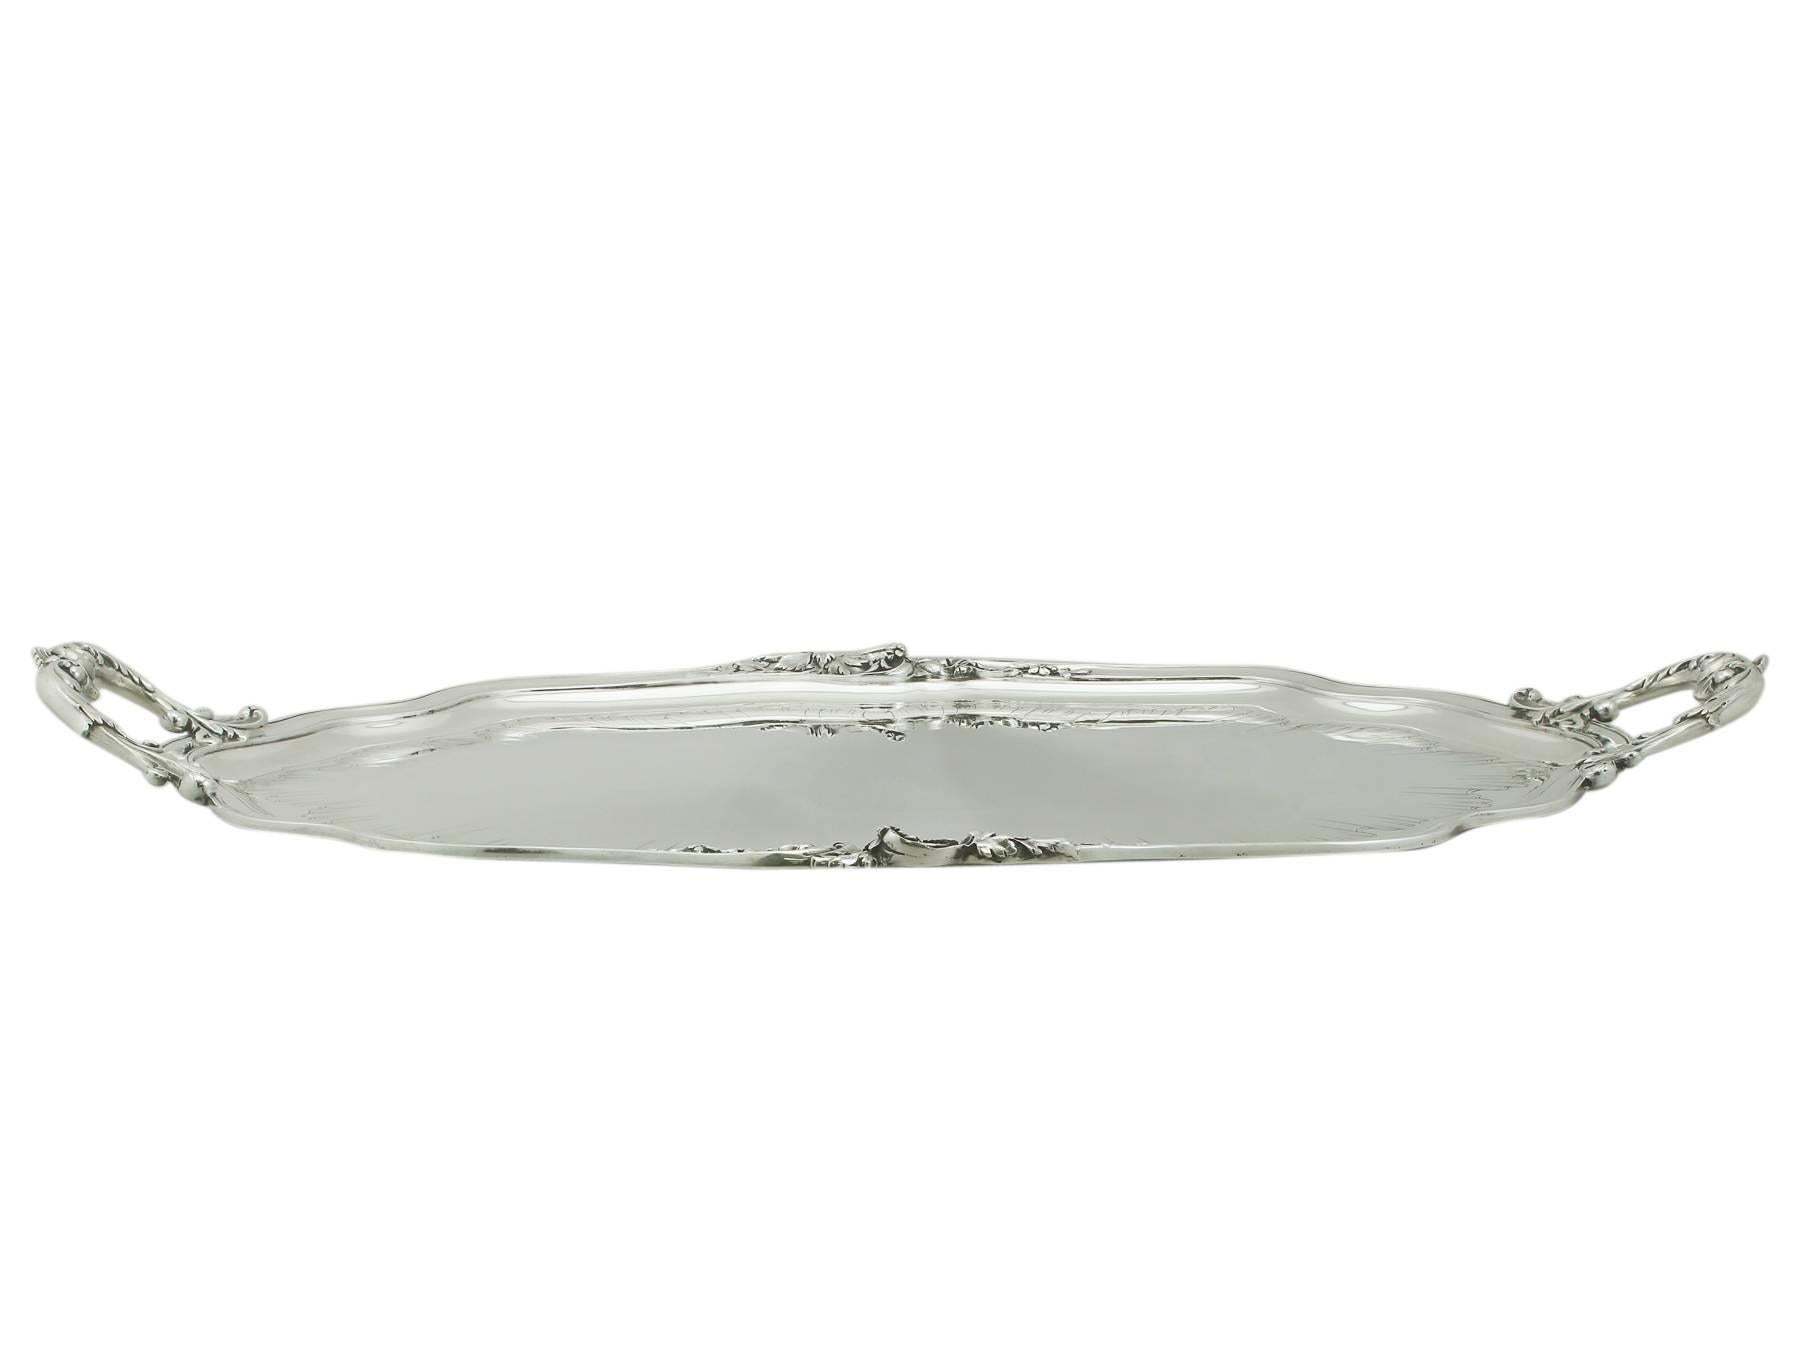 silver drinks tray